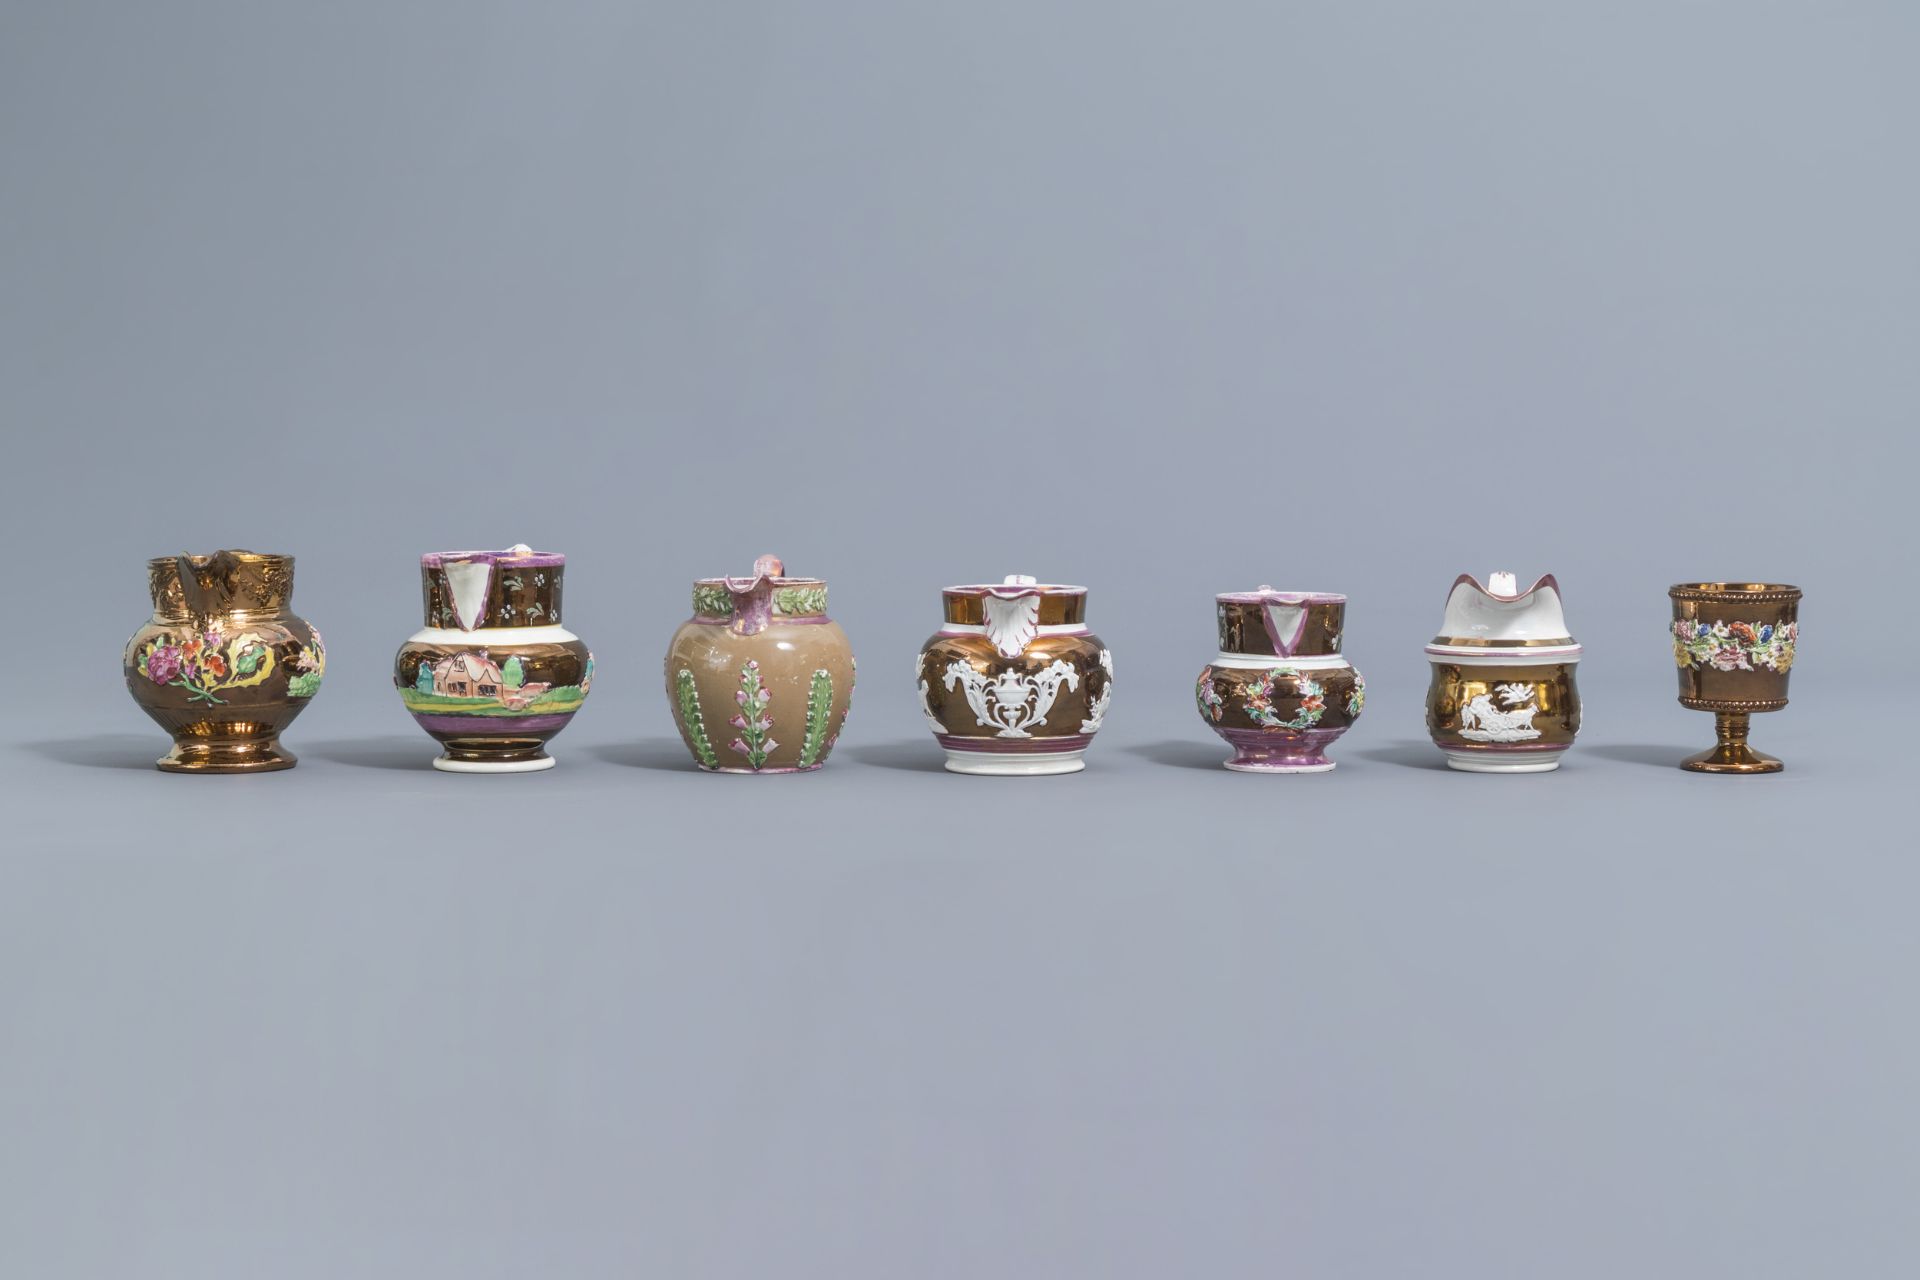 A varied collection of English lustreware items with relief design, 19th C. - Image 34 of 50